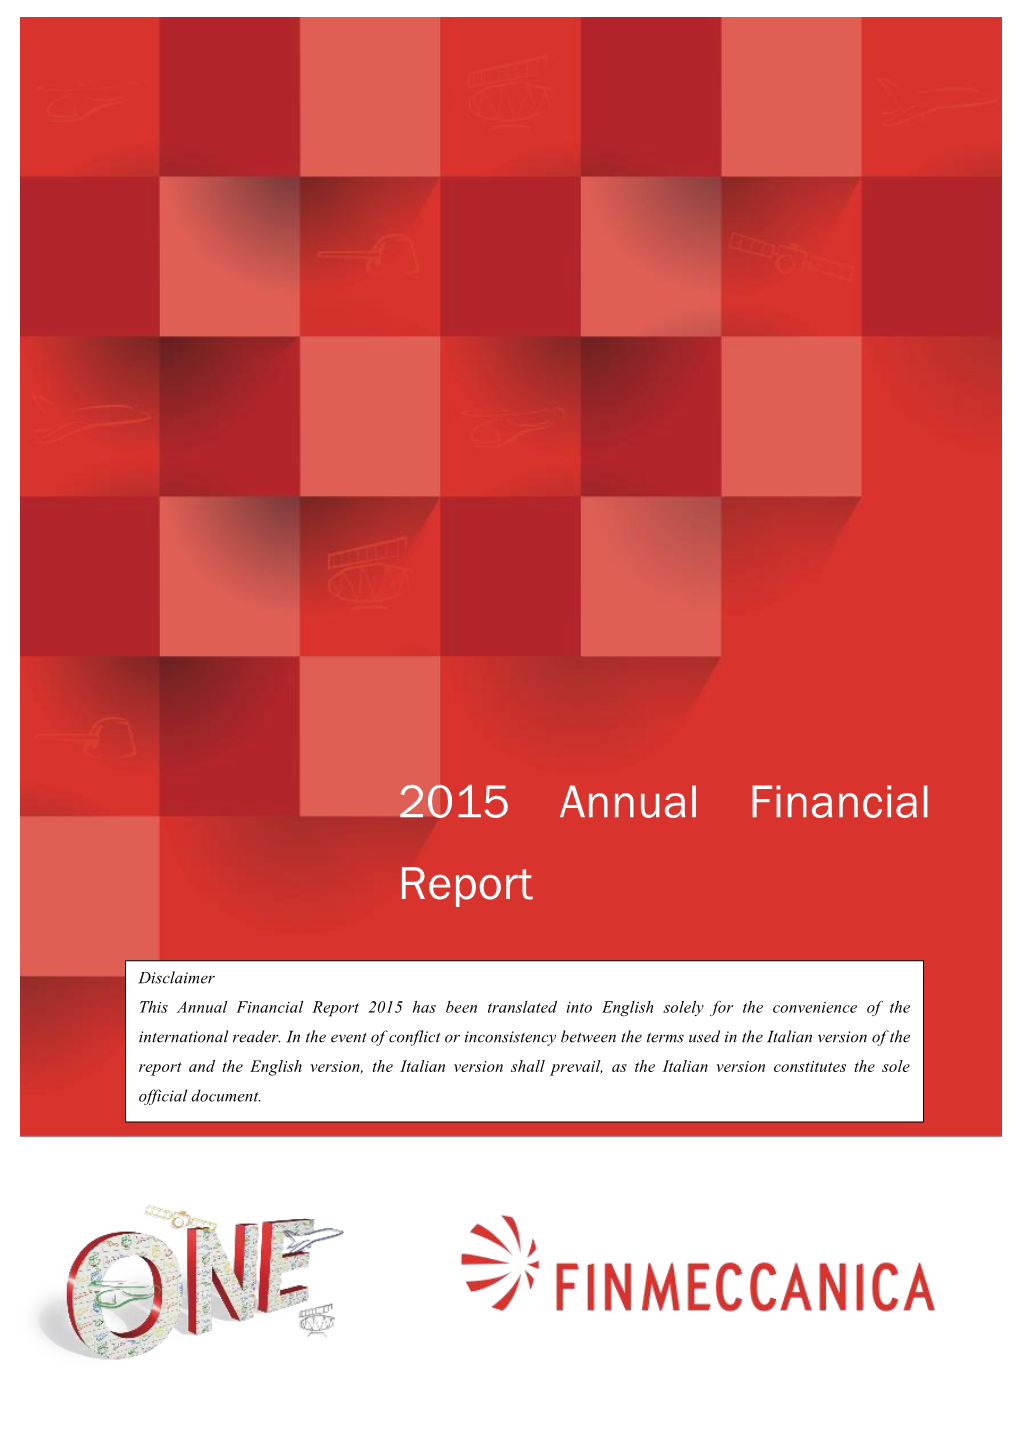 2015 Annual Financial Report